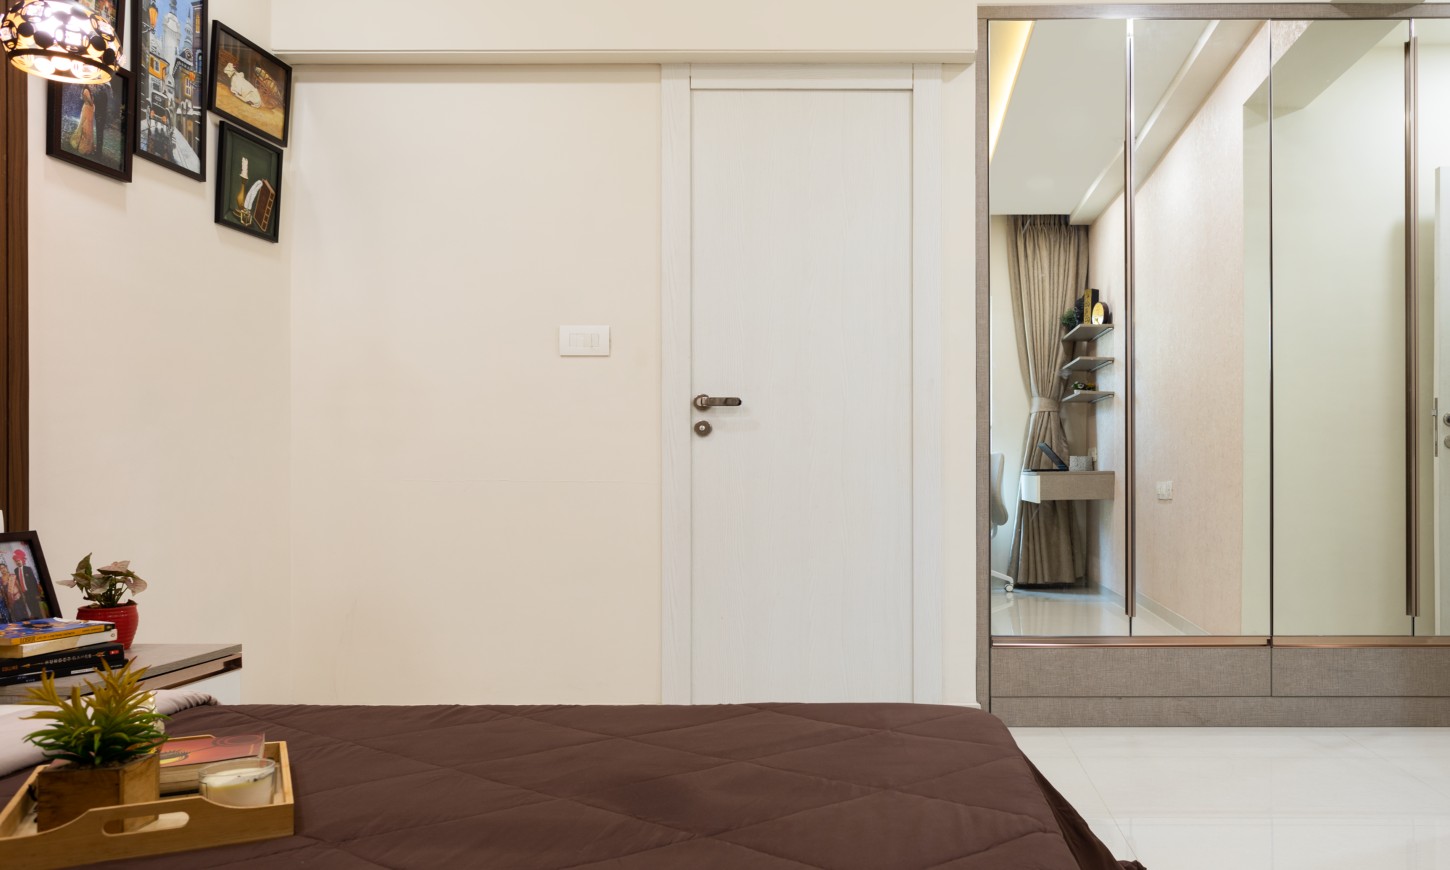 2 bhk apartment in Thane West features a guest bedroom with a mirrored wardrobe designed by a top interior designer